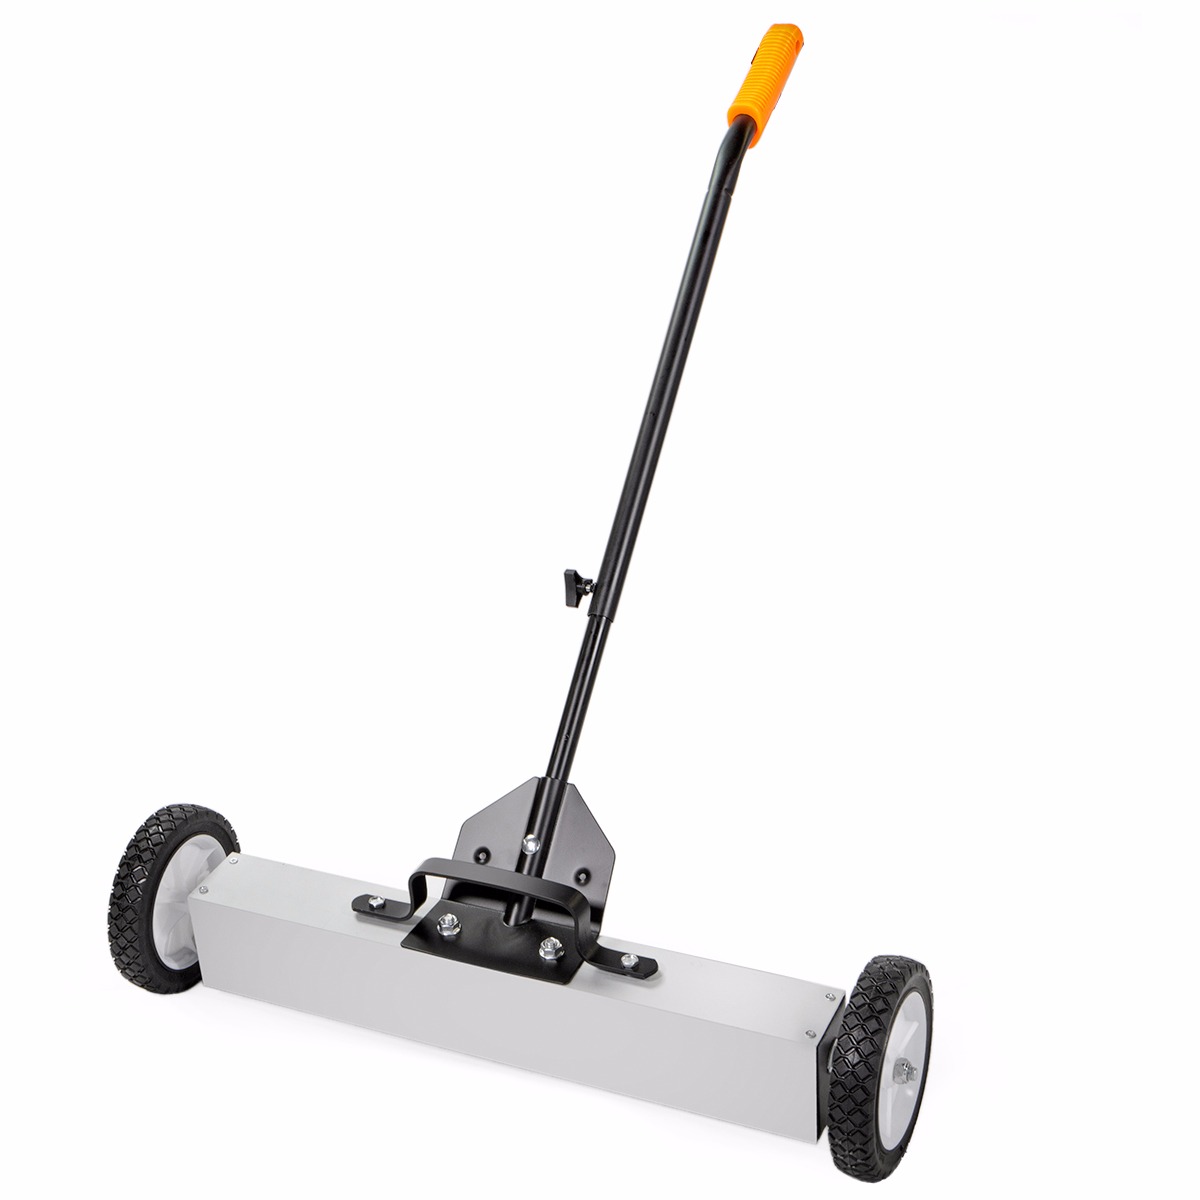 Lowest Price for Magnetic Sweeper to Ecuador Factories